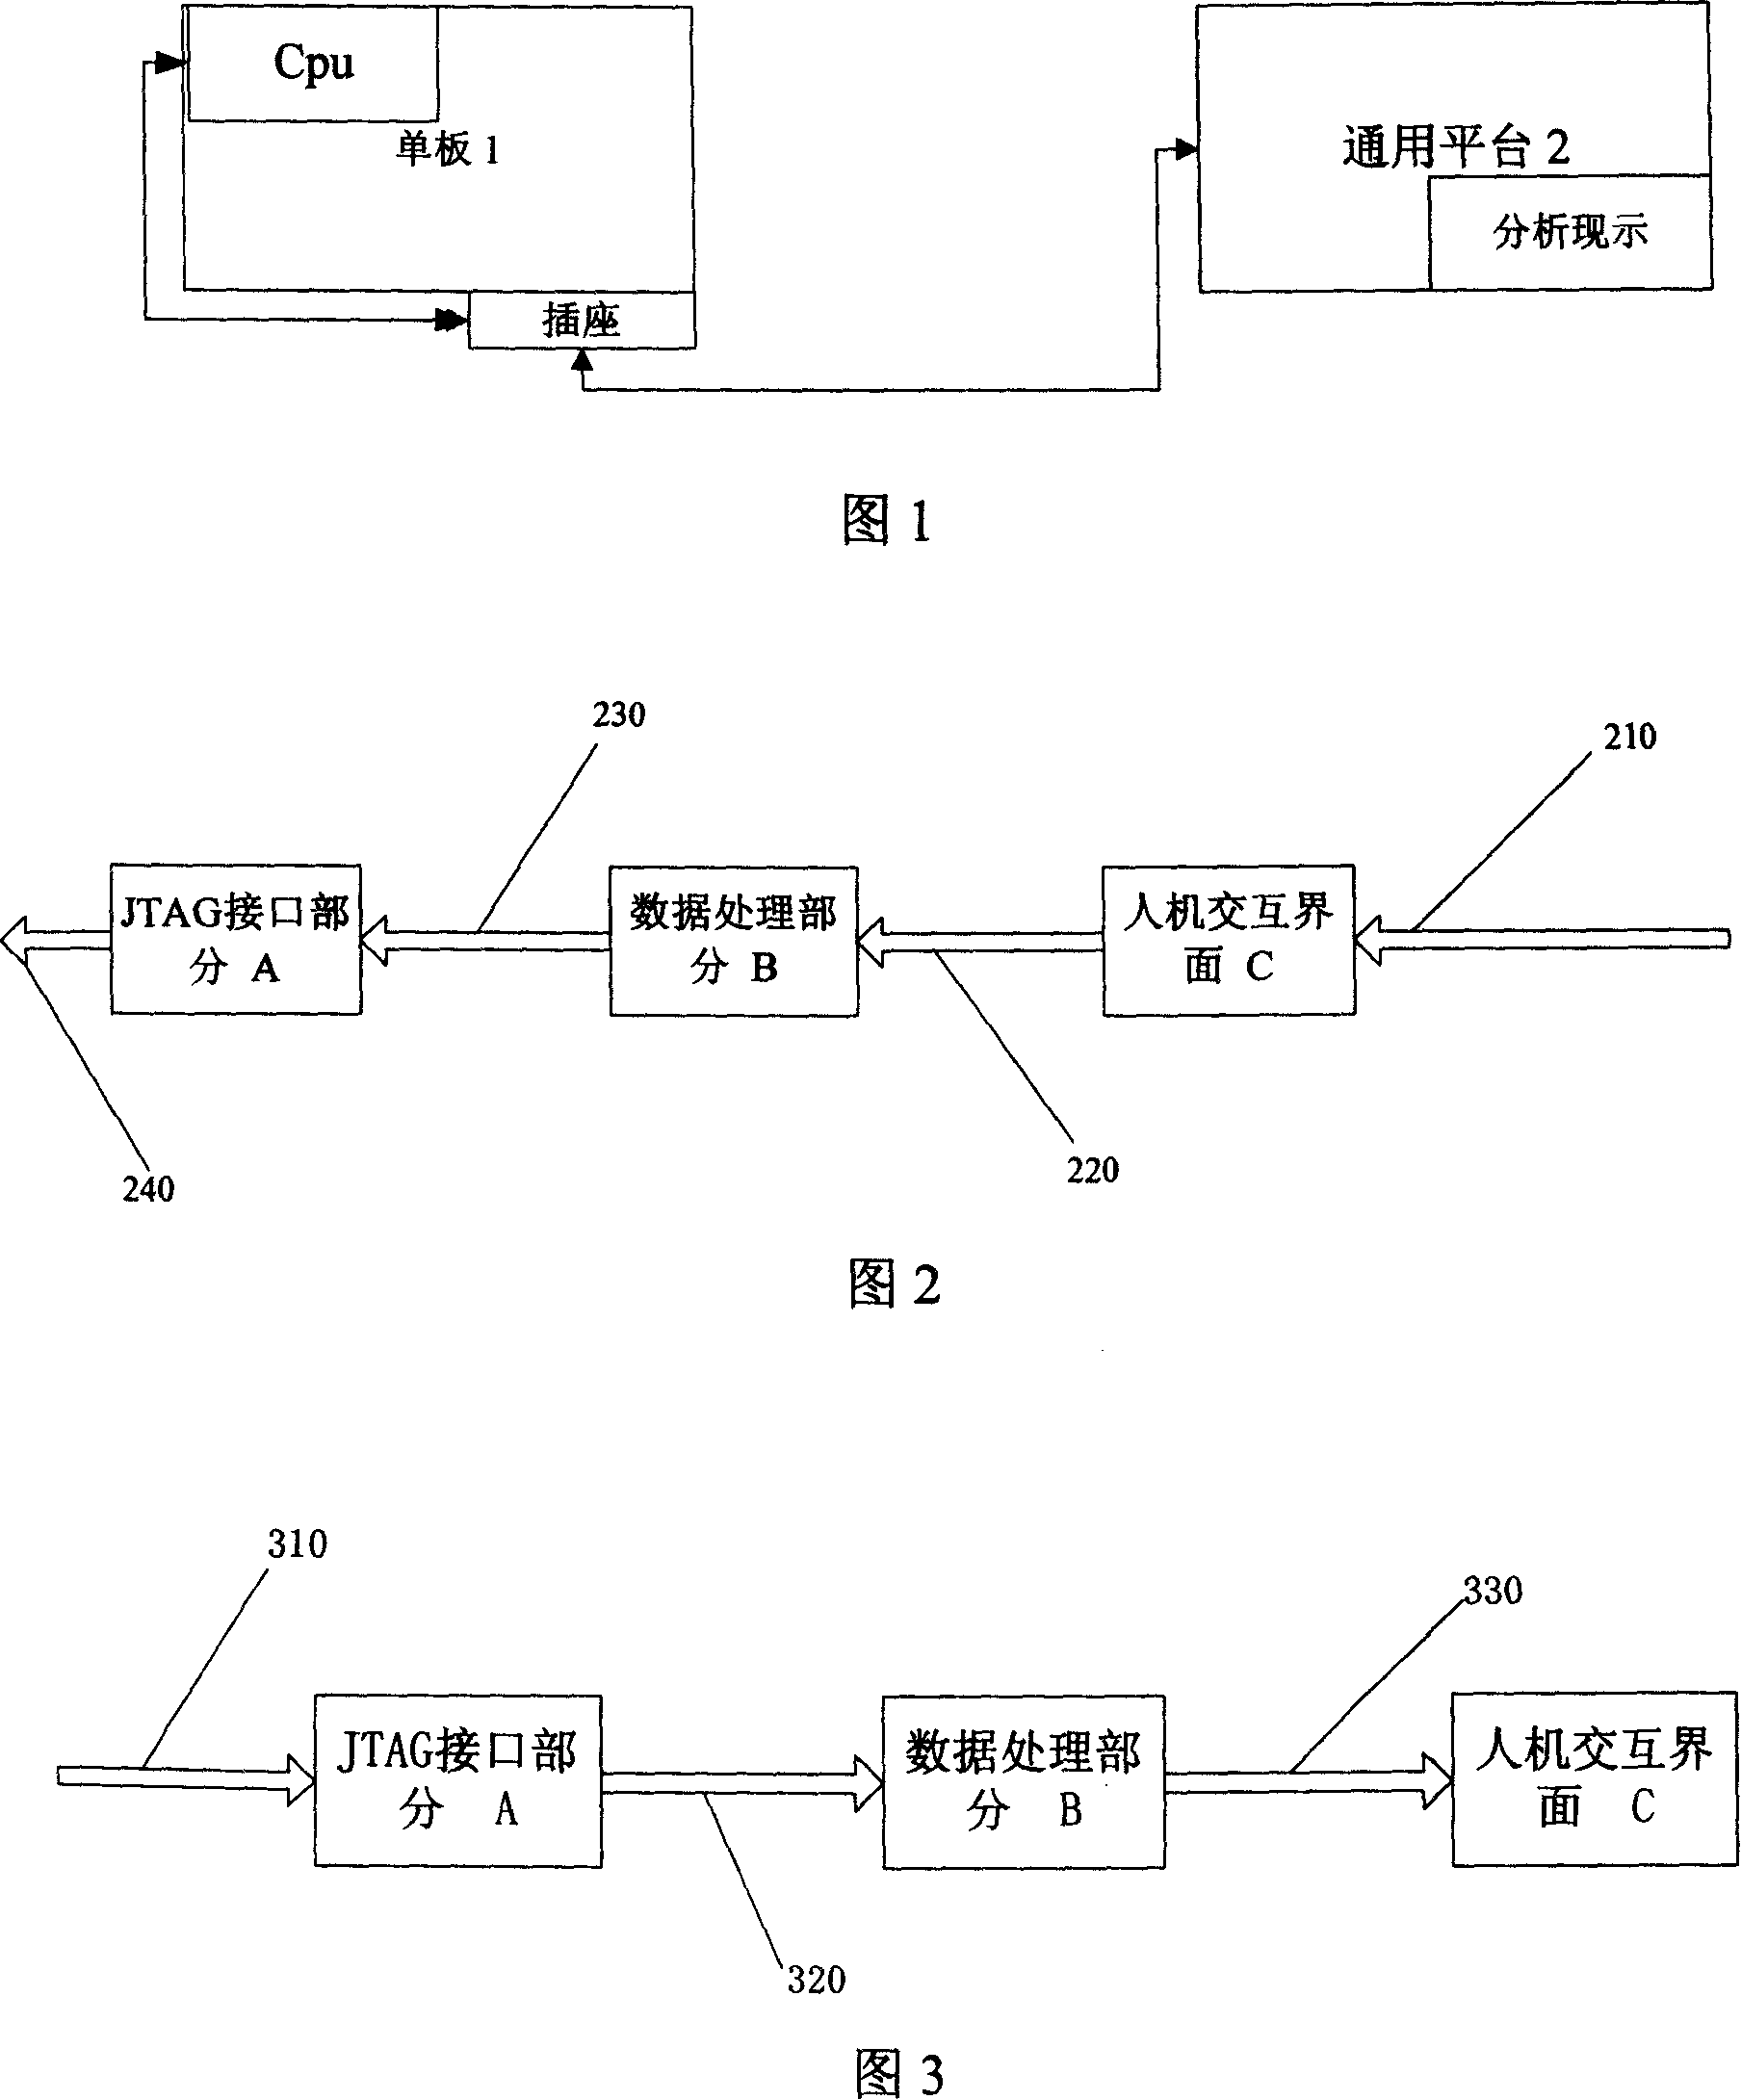 A general platform and method for system debugging and monitoring